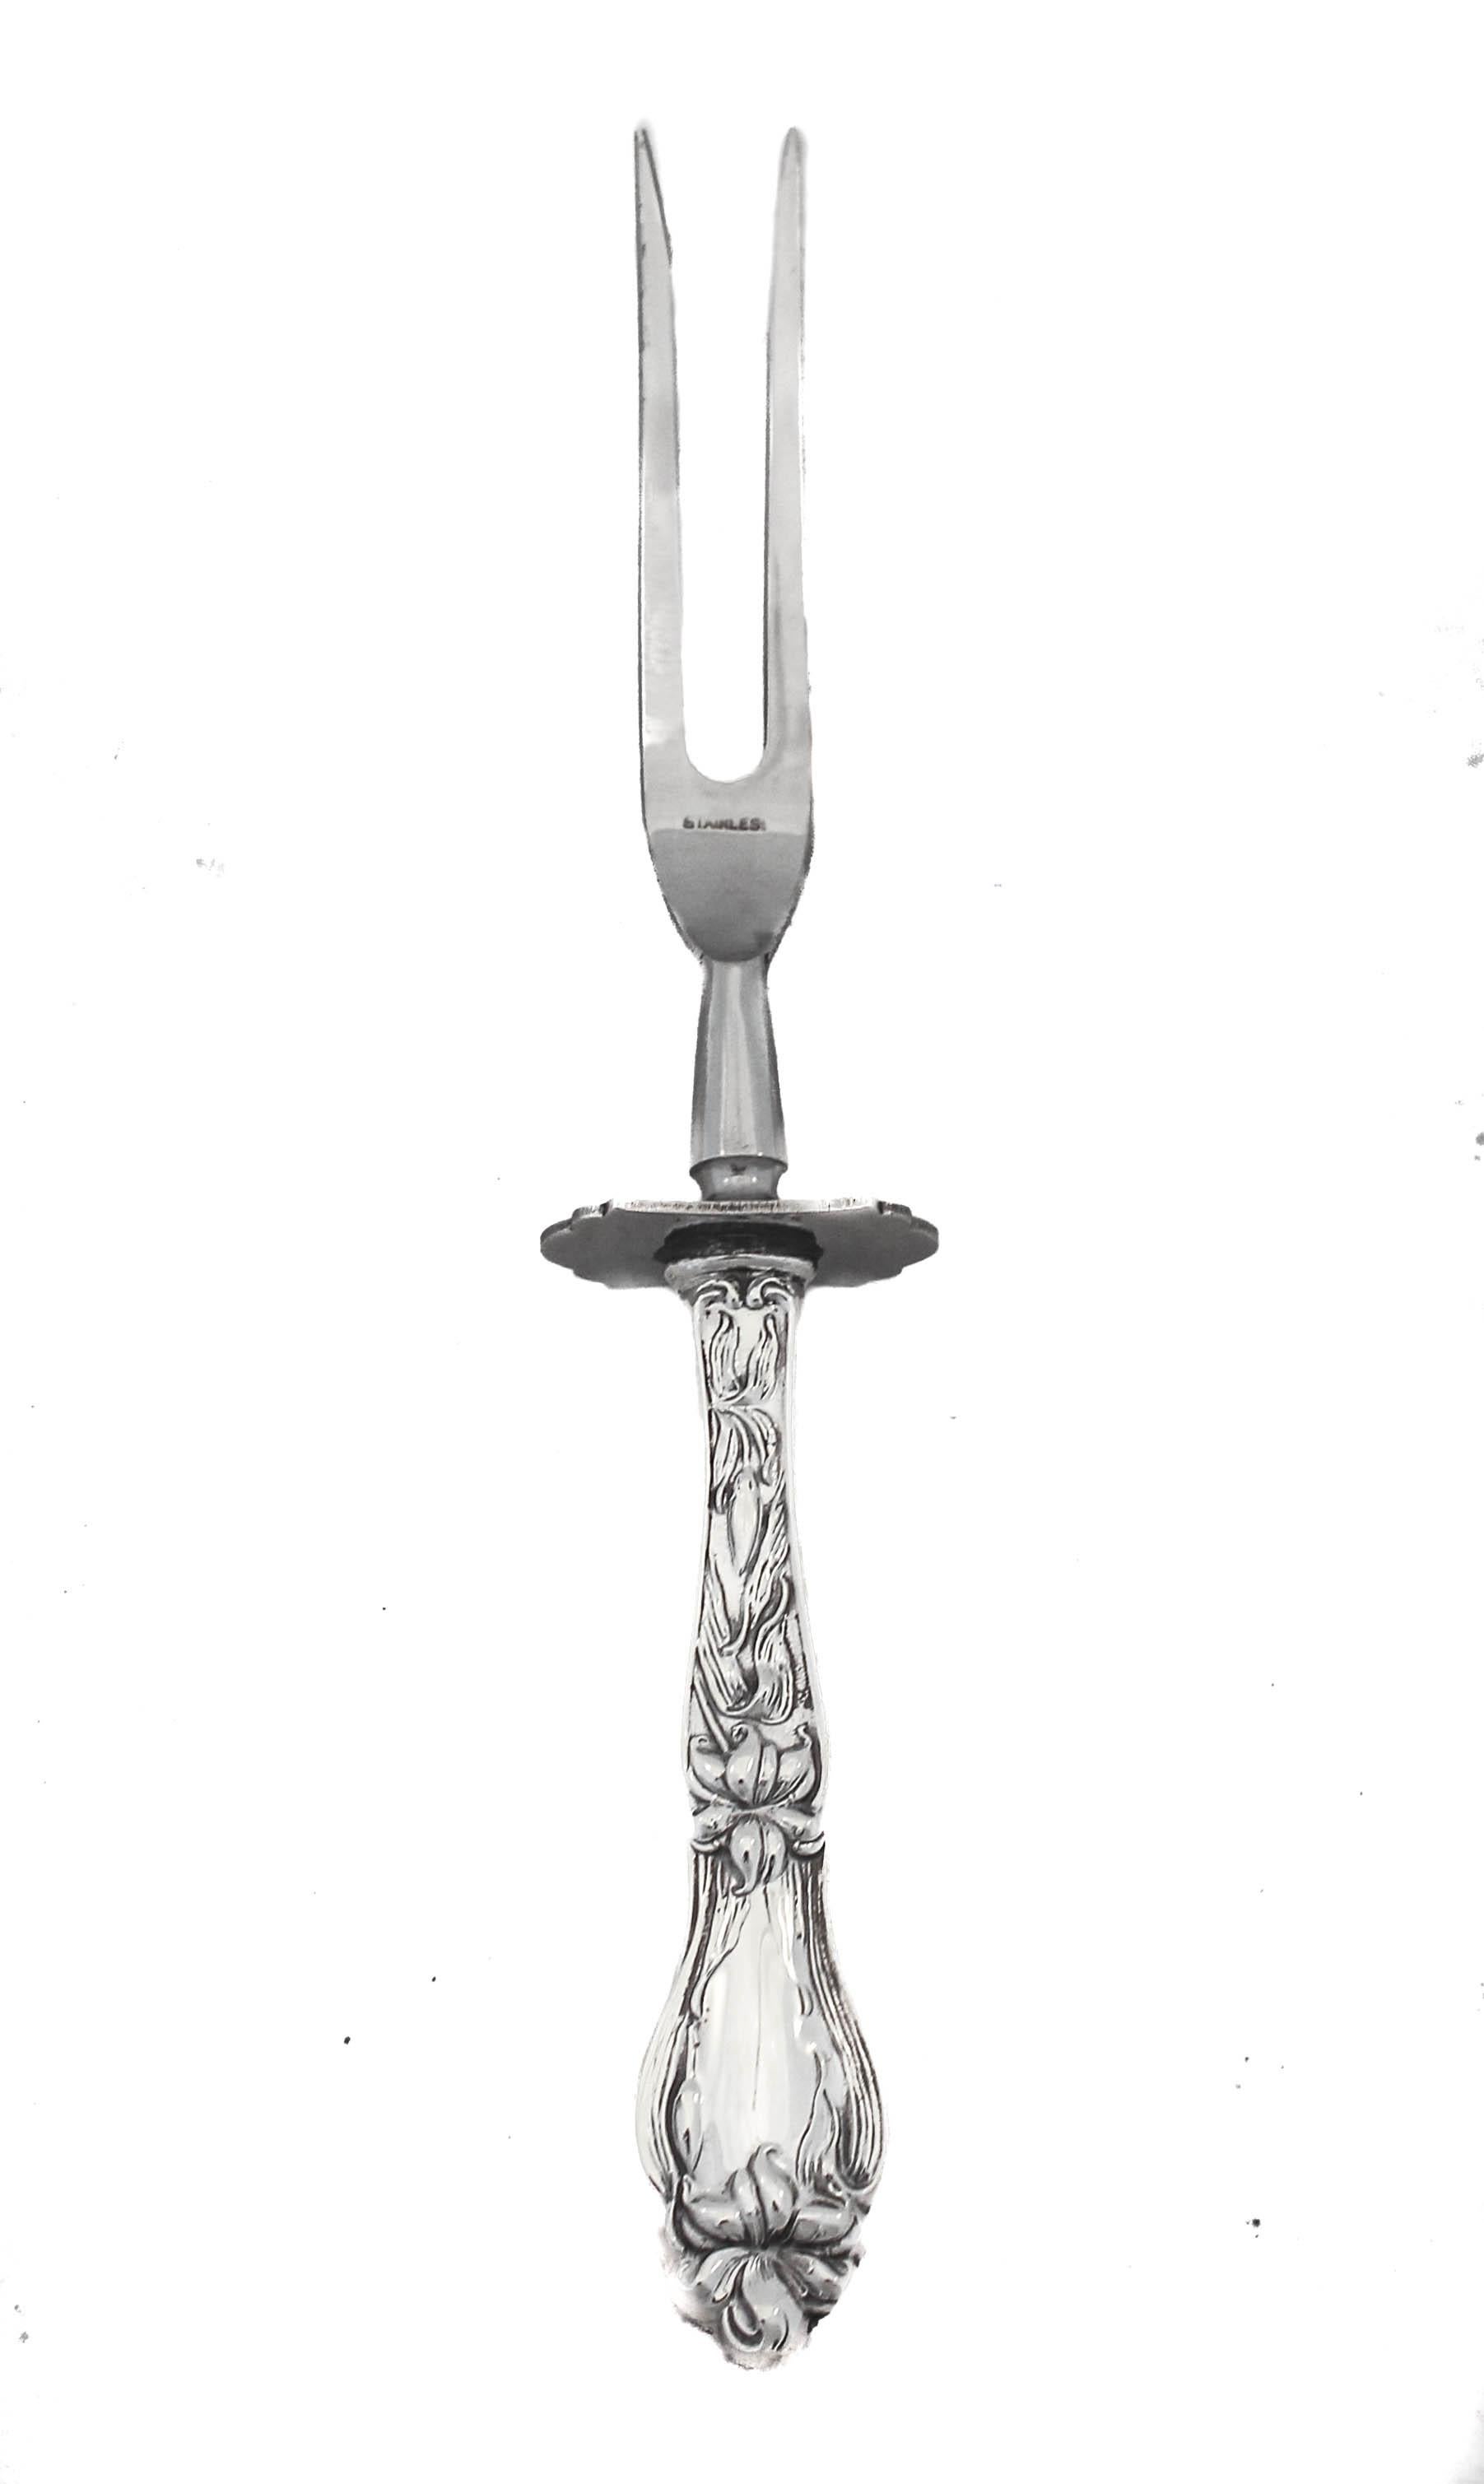 Offering a sterling silver carving fork and knife in the Du Barry pattern by International Silver. Just in time for the holiday season, a lovely carving set to dress up your holiday table. Garnish your gorgeous table with these lovely serving